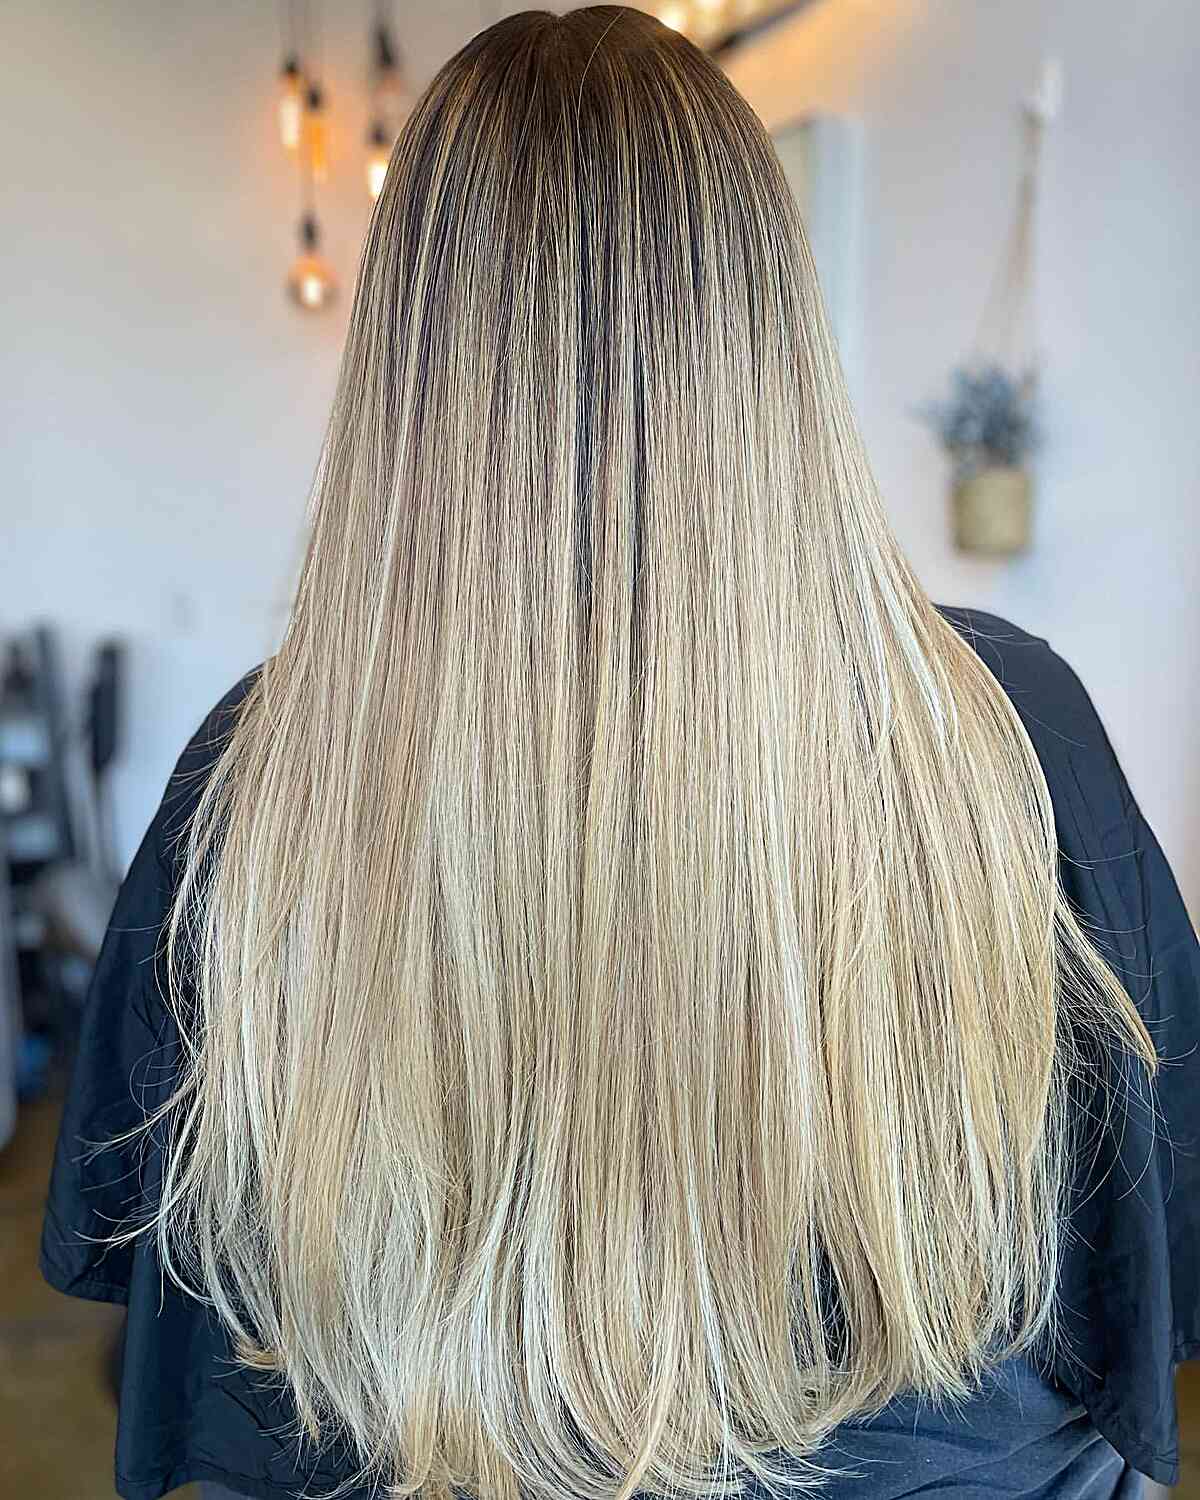 Long Straight Summer Blonde Balayage Hair with Dark Roots